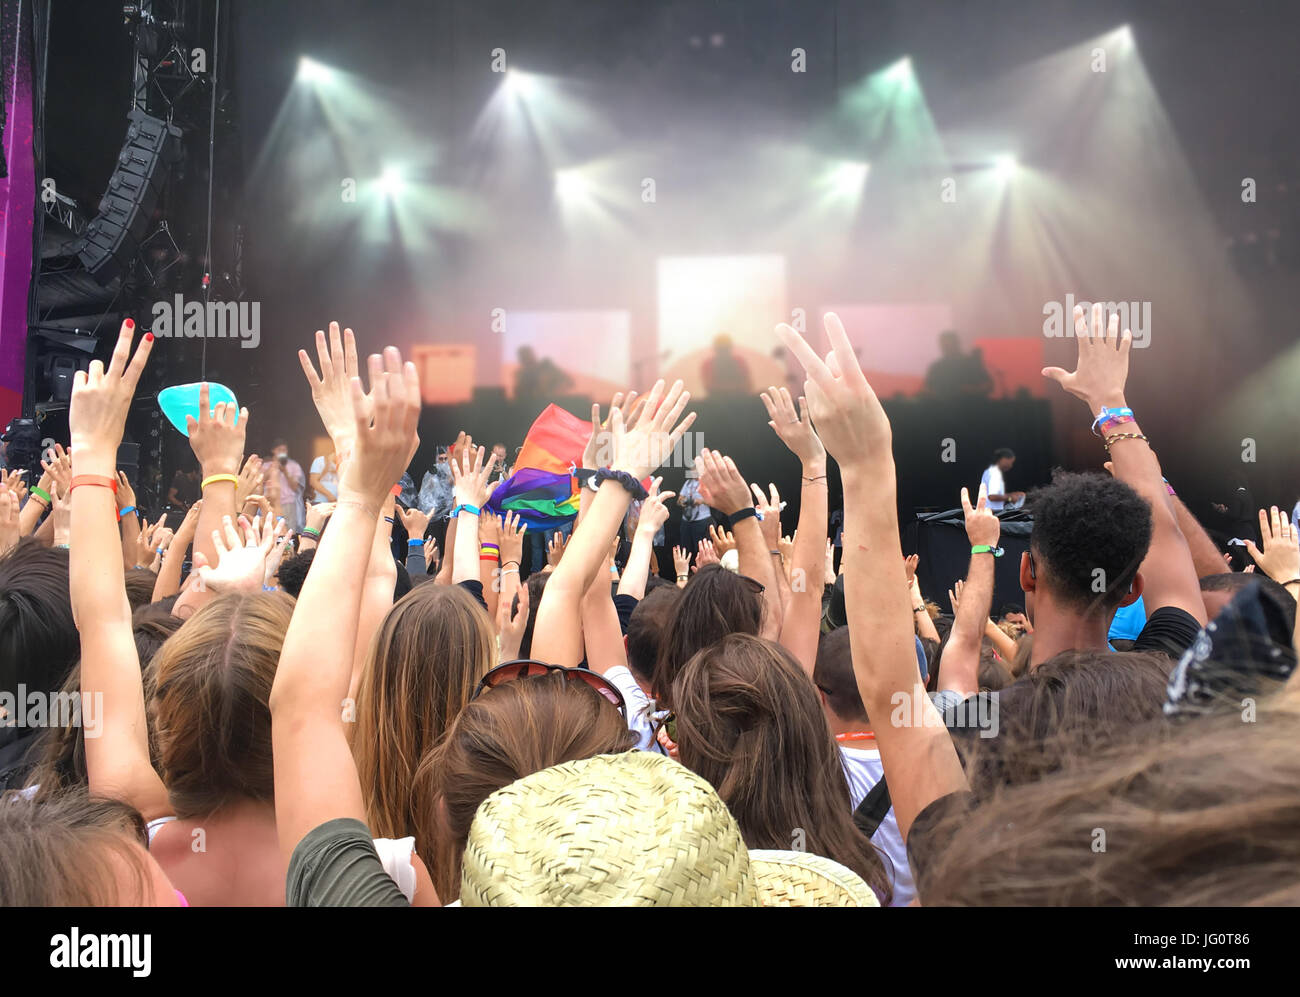 Audience with hands raised at a music festival, blurred stage lights in the background Stock Photo